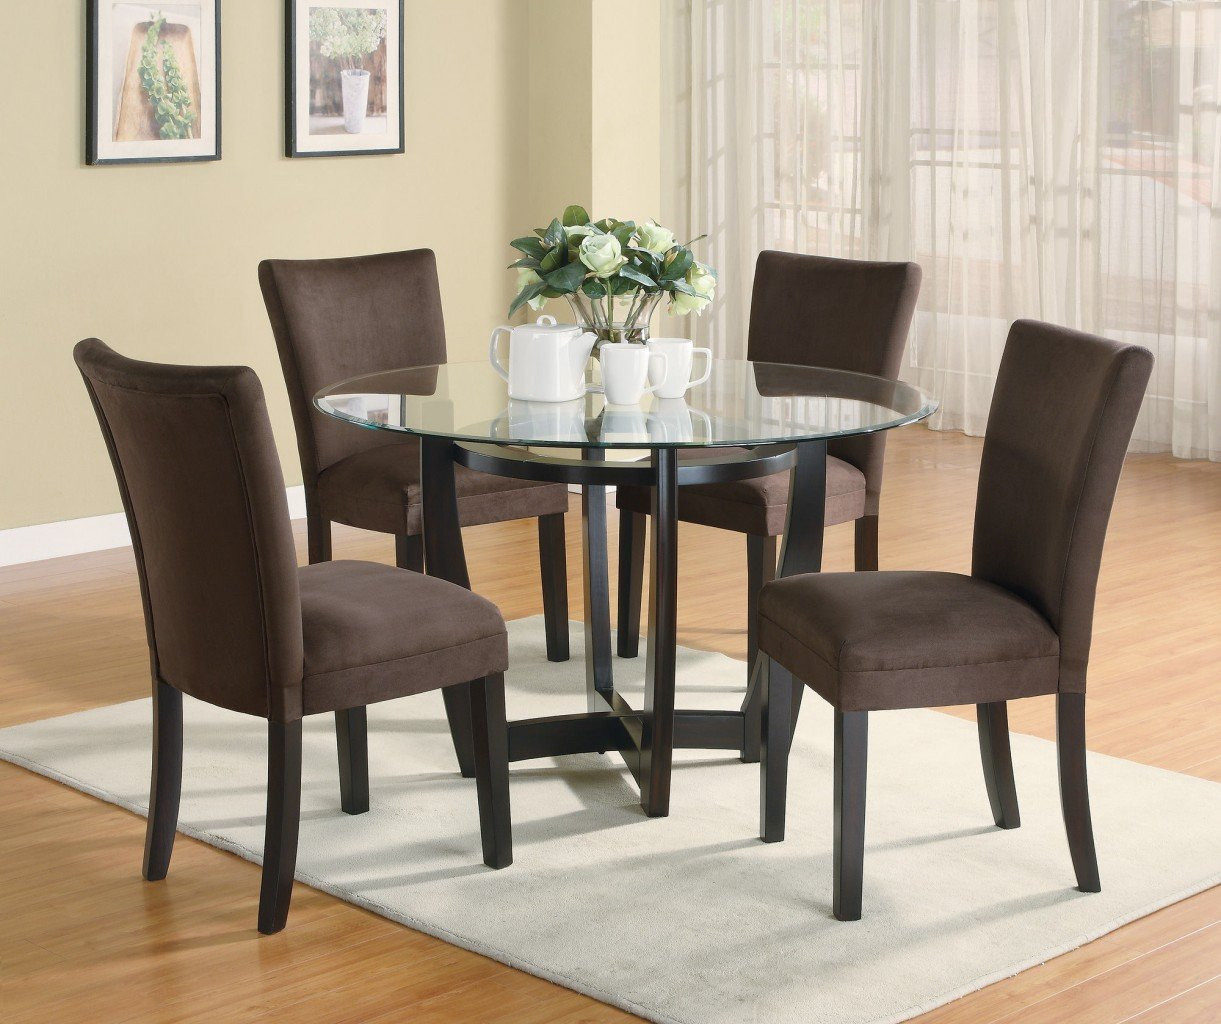 Cheap Dinner Table Set Best Of Cheap Dining Room Table Sets Home Furniture Design